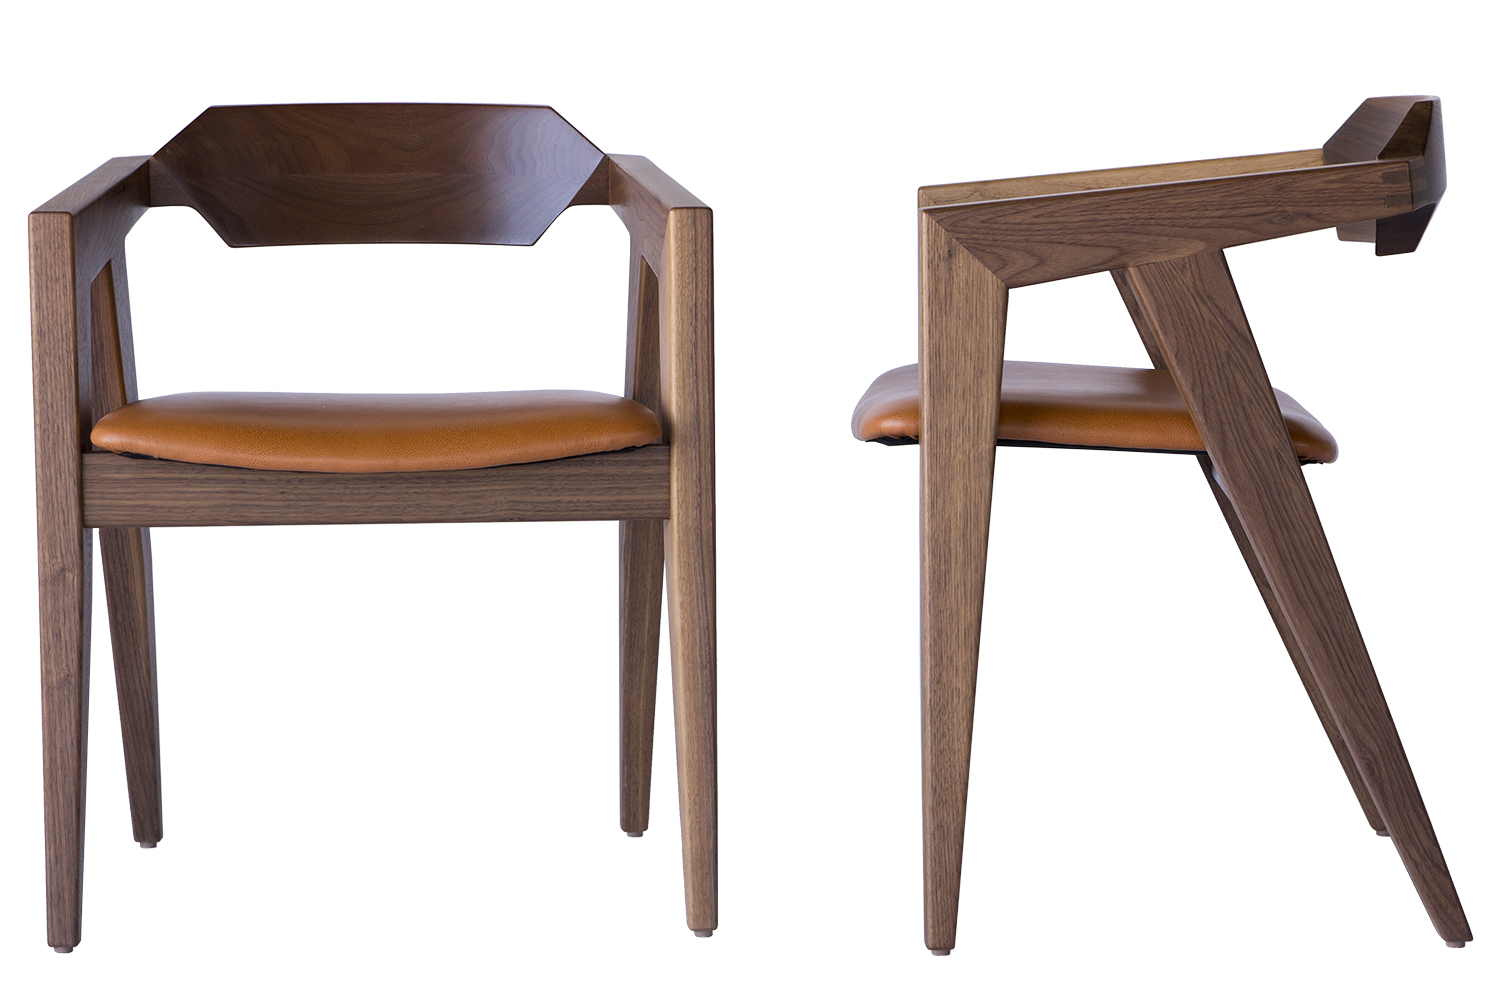 V2 luxury sustainable handcrafted made in america maine furniture custom angela adams dining chair